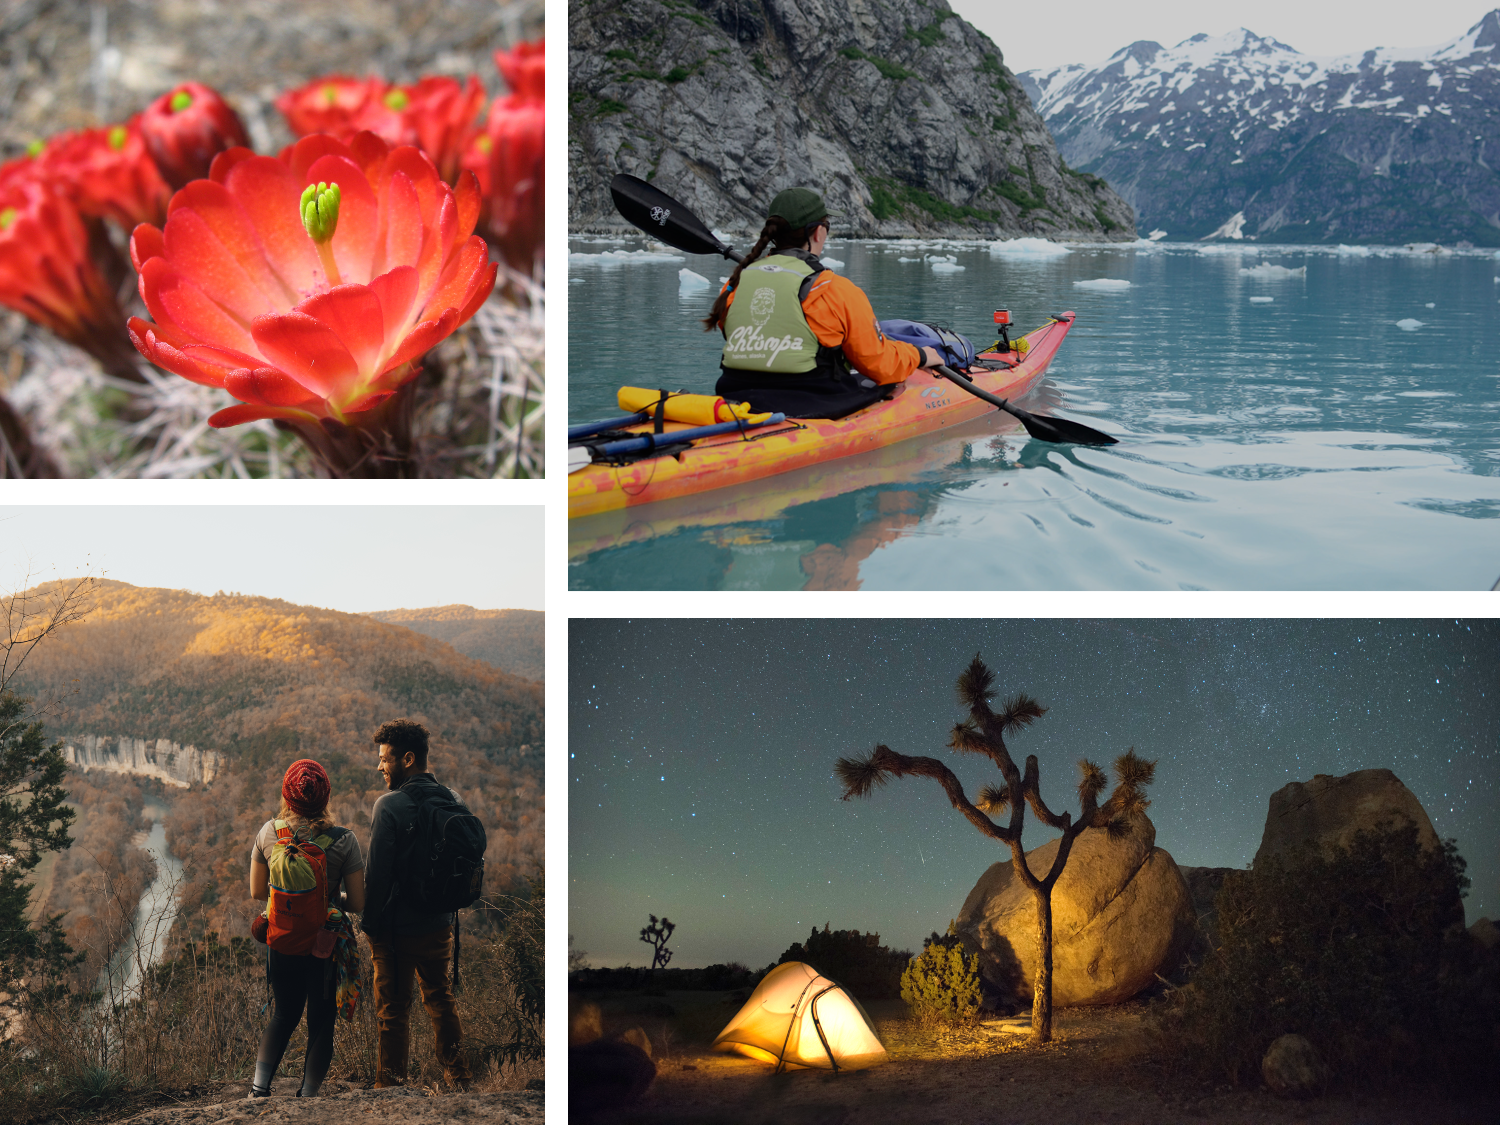 Collage of wilderness photos including a flowering cactus, hikers on a bluff, a kayak in a bay, and a tent illuminated by a lantern..